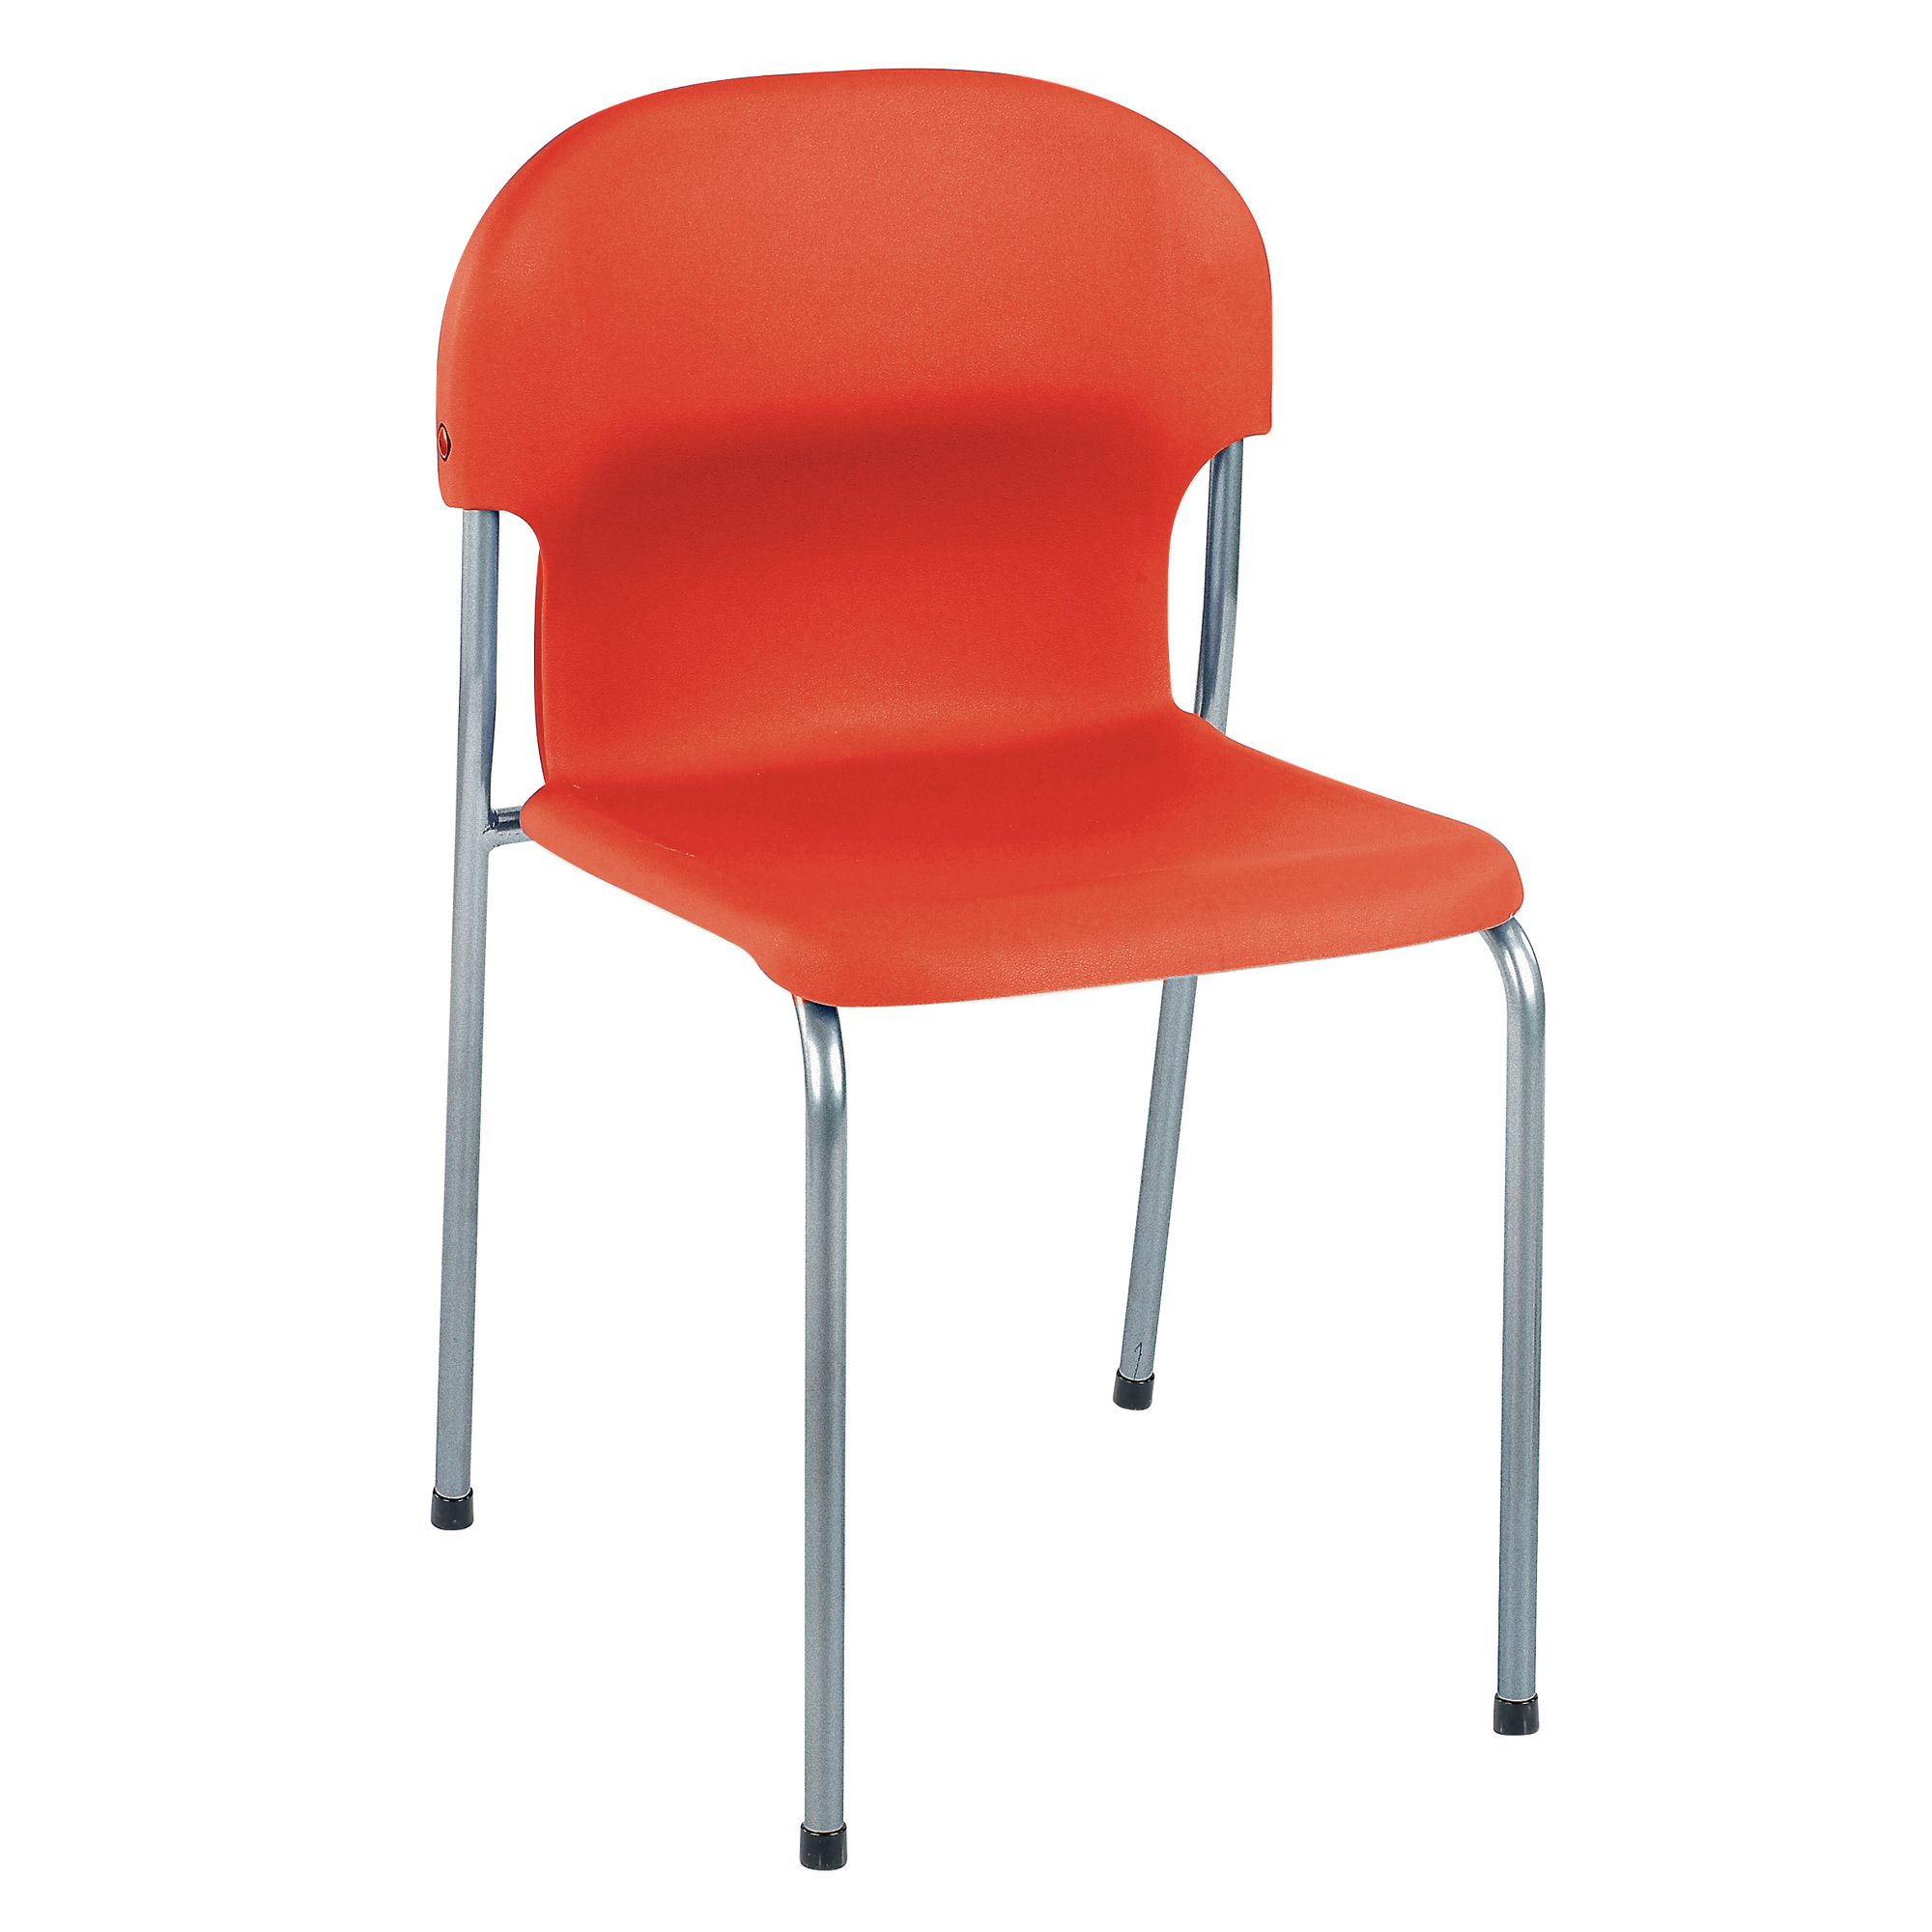 Chair 2000 H380mm - Red